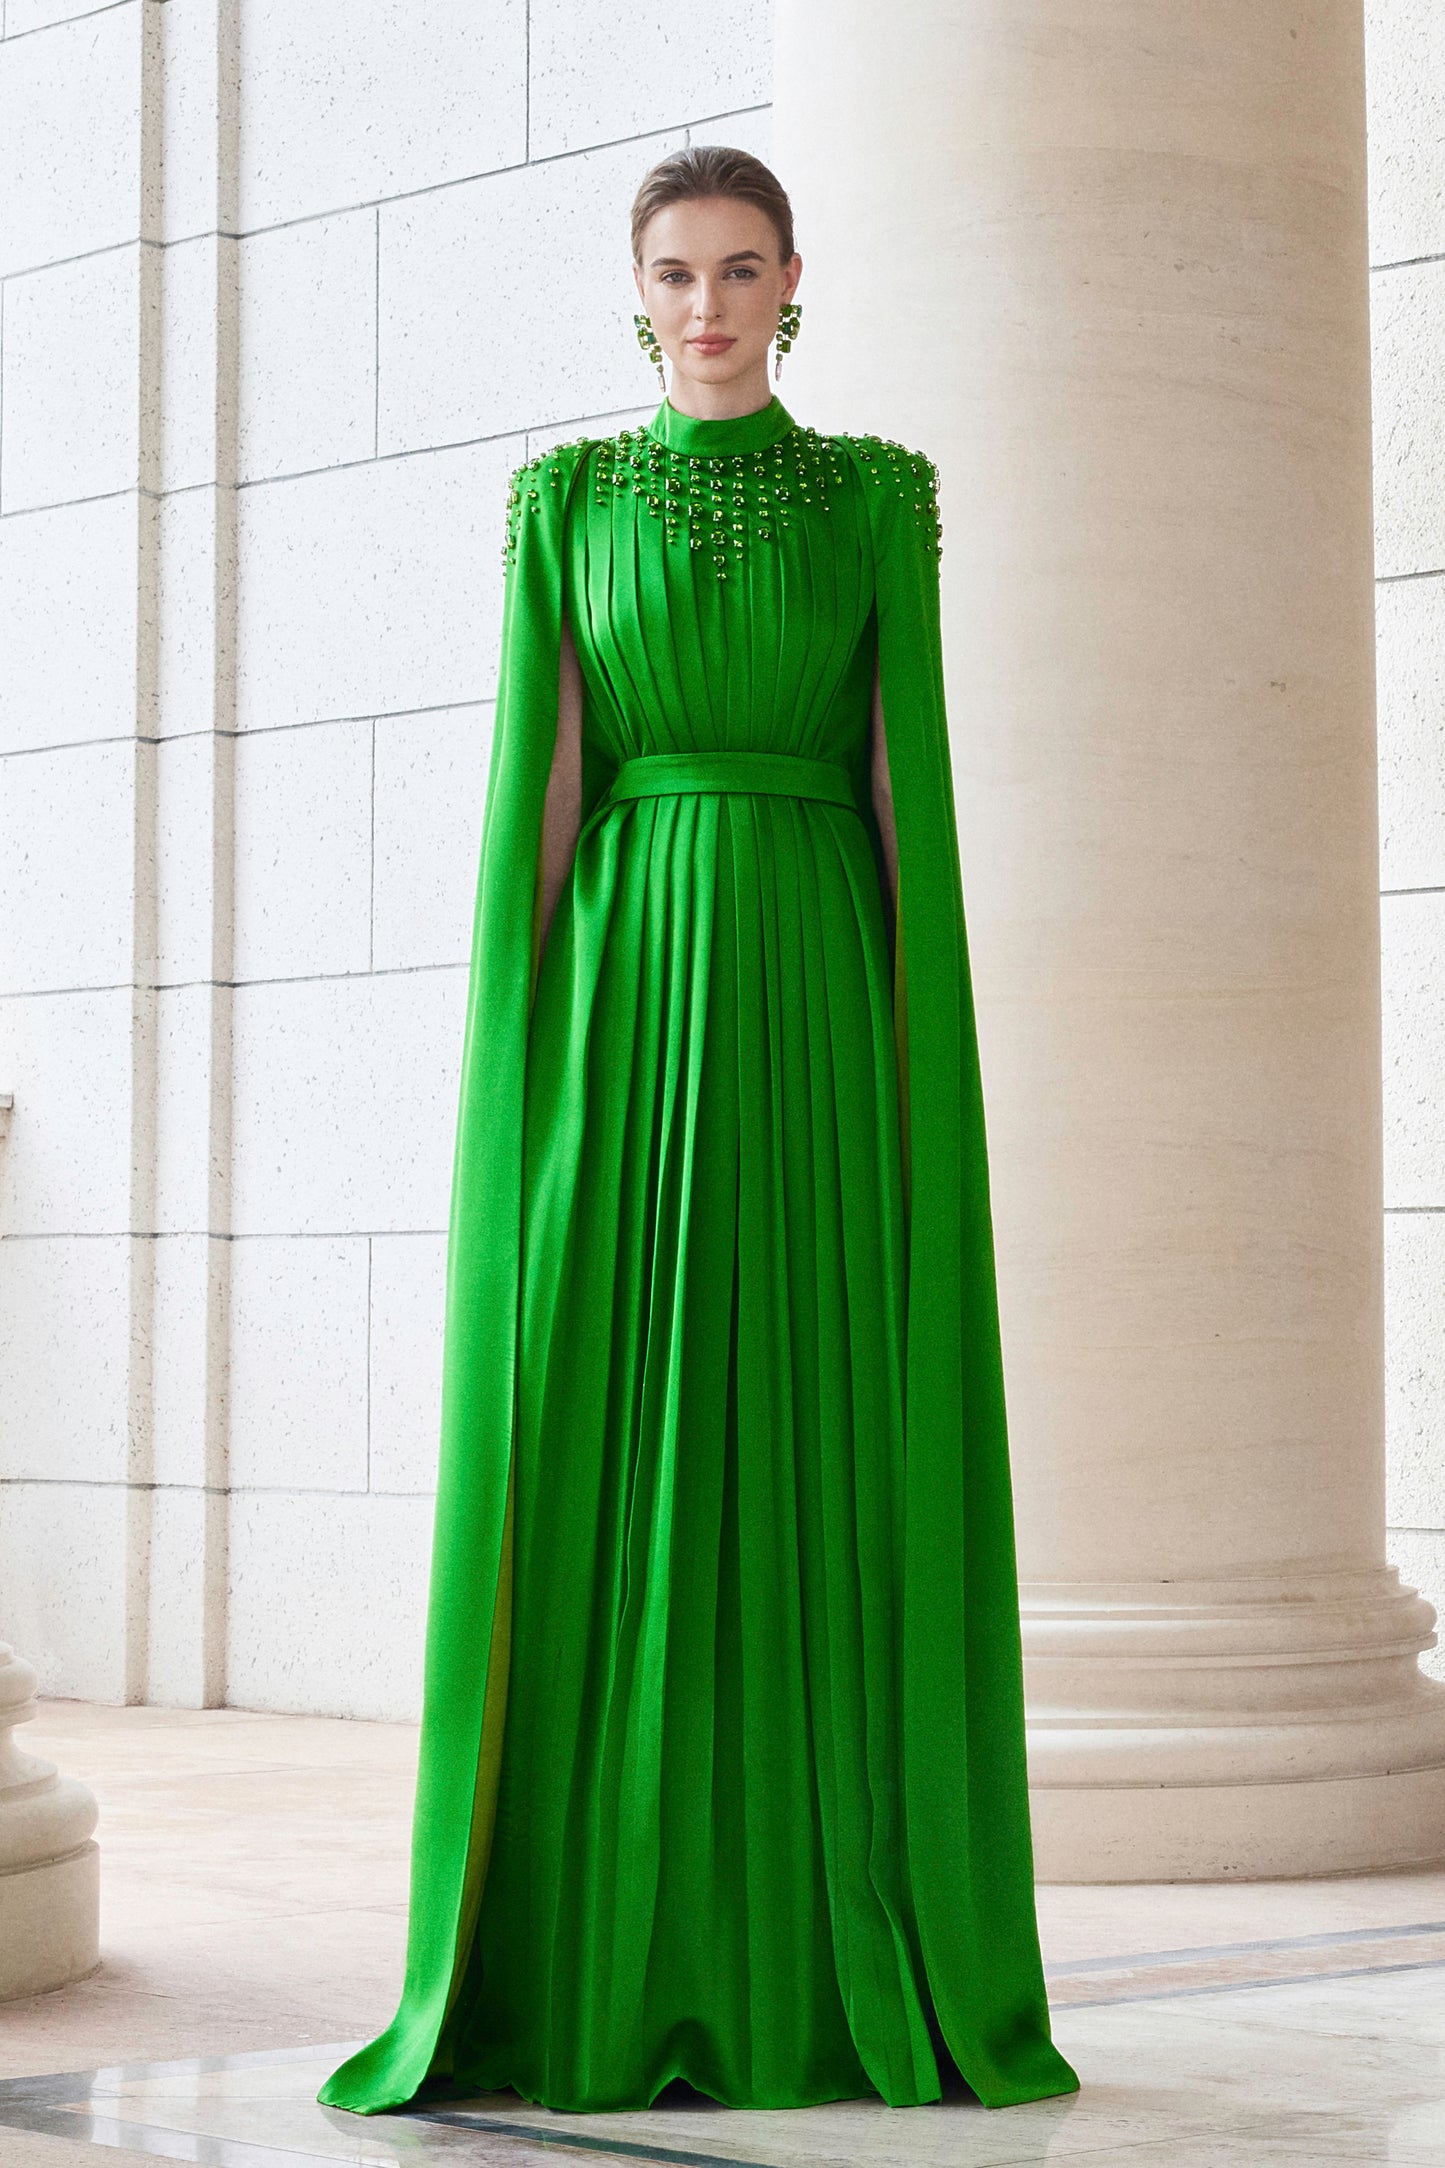 Long Pleated Trapeze Dress With Shoulder Cape